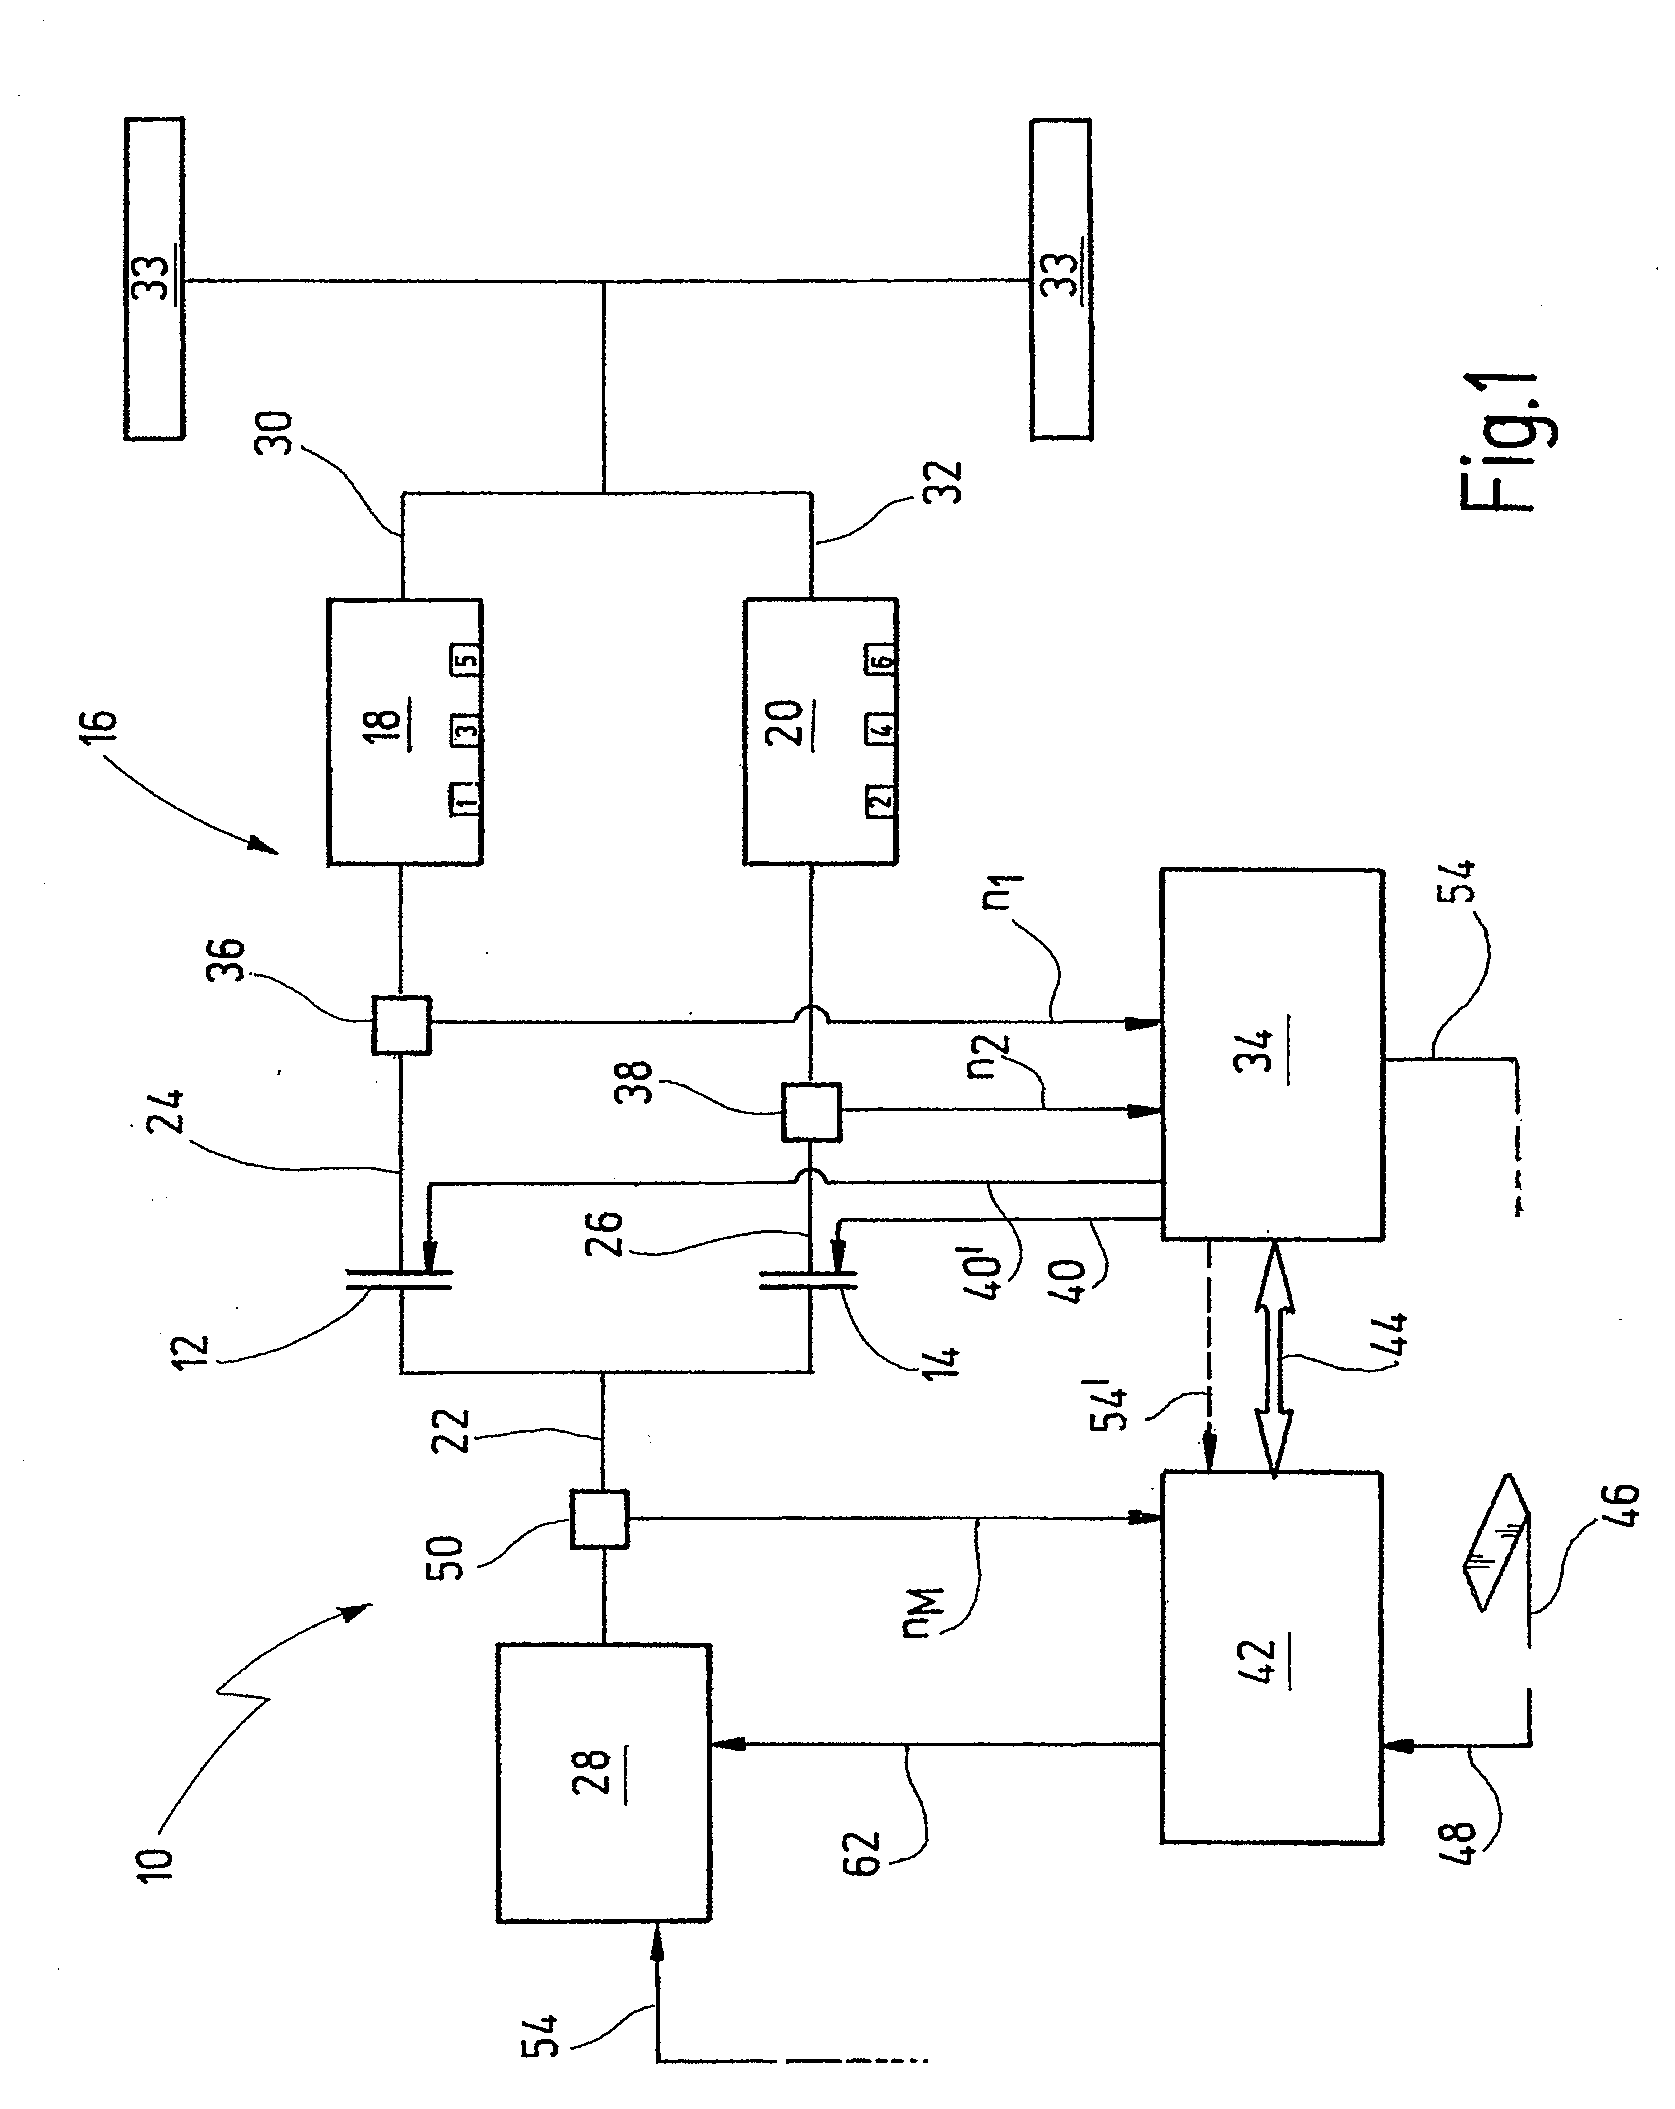 System and method for operating a dual clutch transmission during failure of an engine speed sensor or a bus connection between control modules